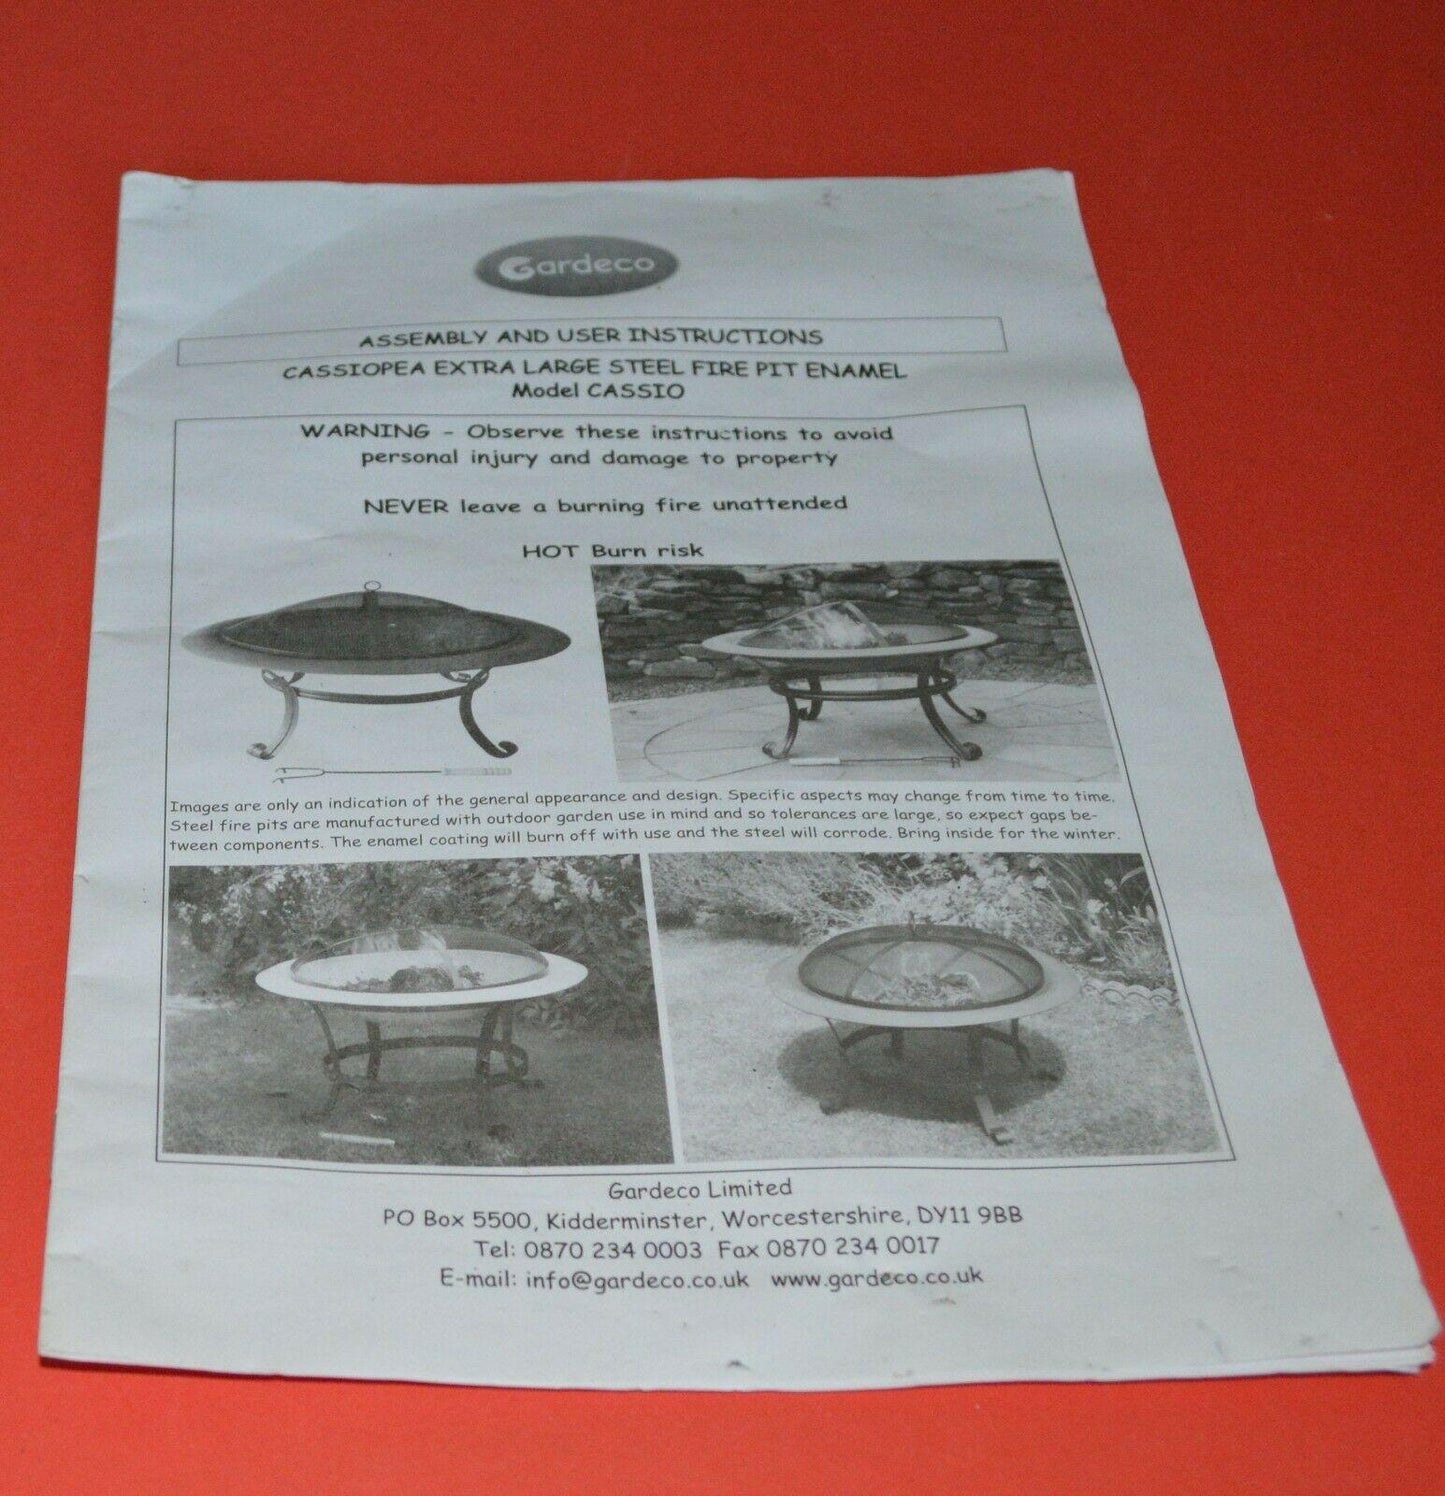 BOXED GARDECO ENAMEL COATED OUTDOOR FIRE PIT(SHOP CLEARANCE) - TMD167207